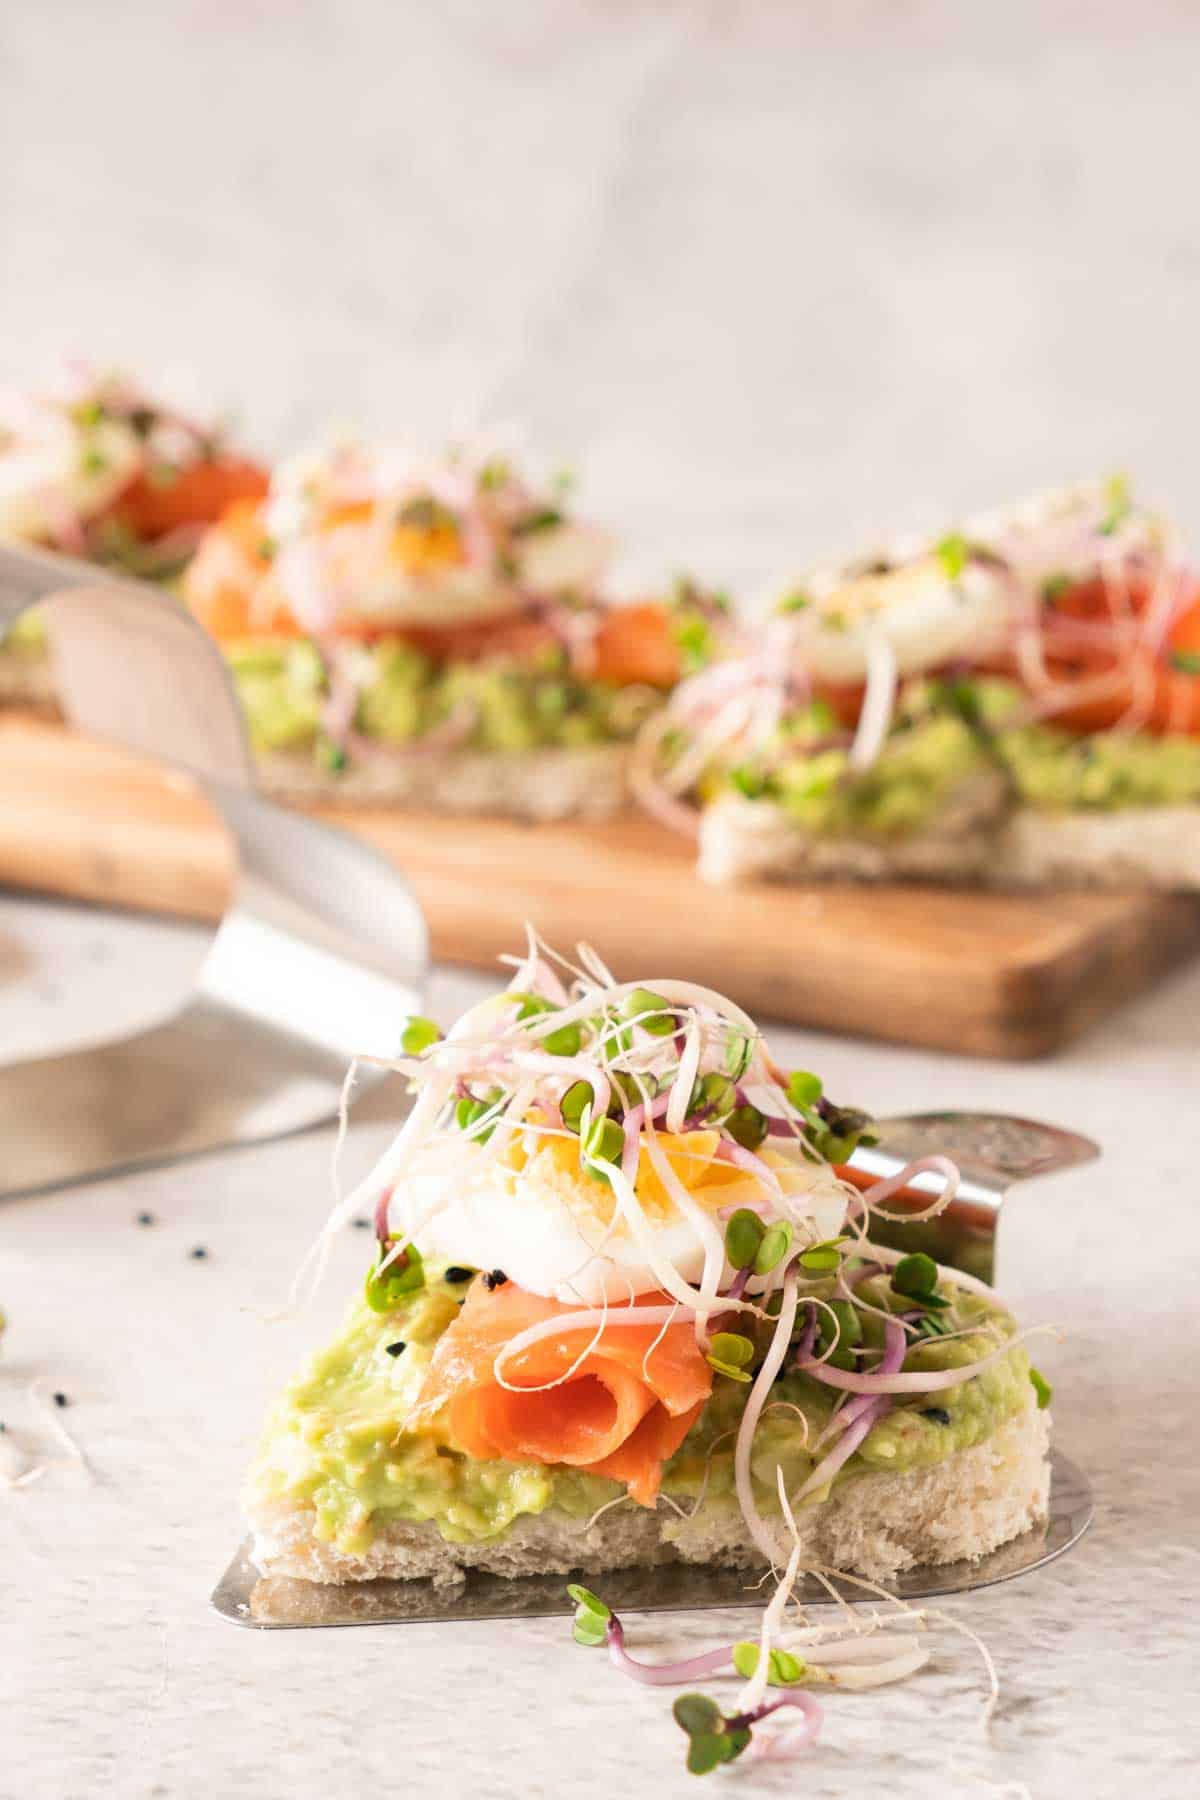 Avocado and smoked salmon heart shaped sandwich topped with sprouts on a wooden cutting board.